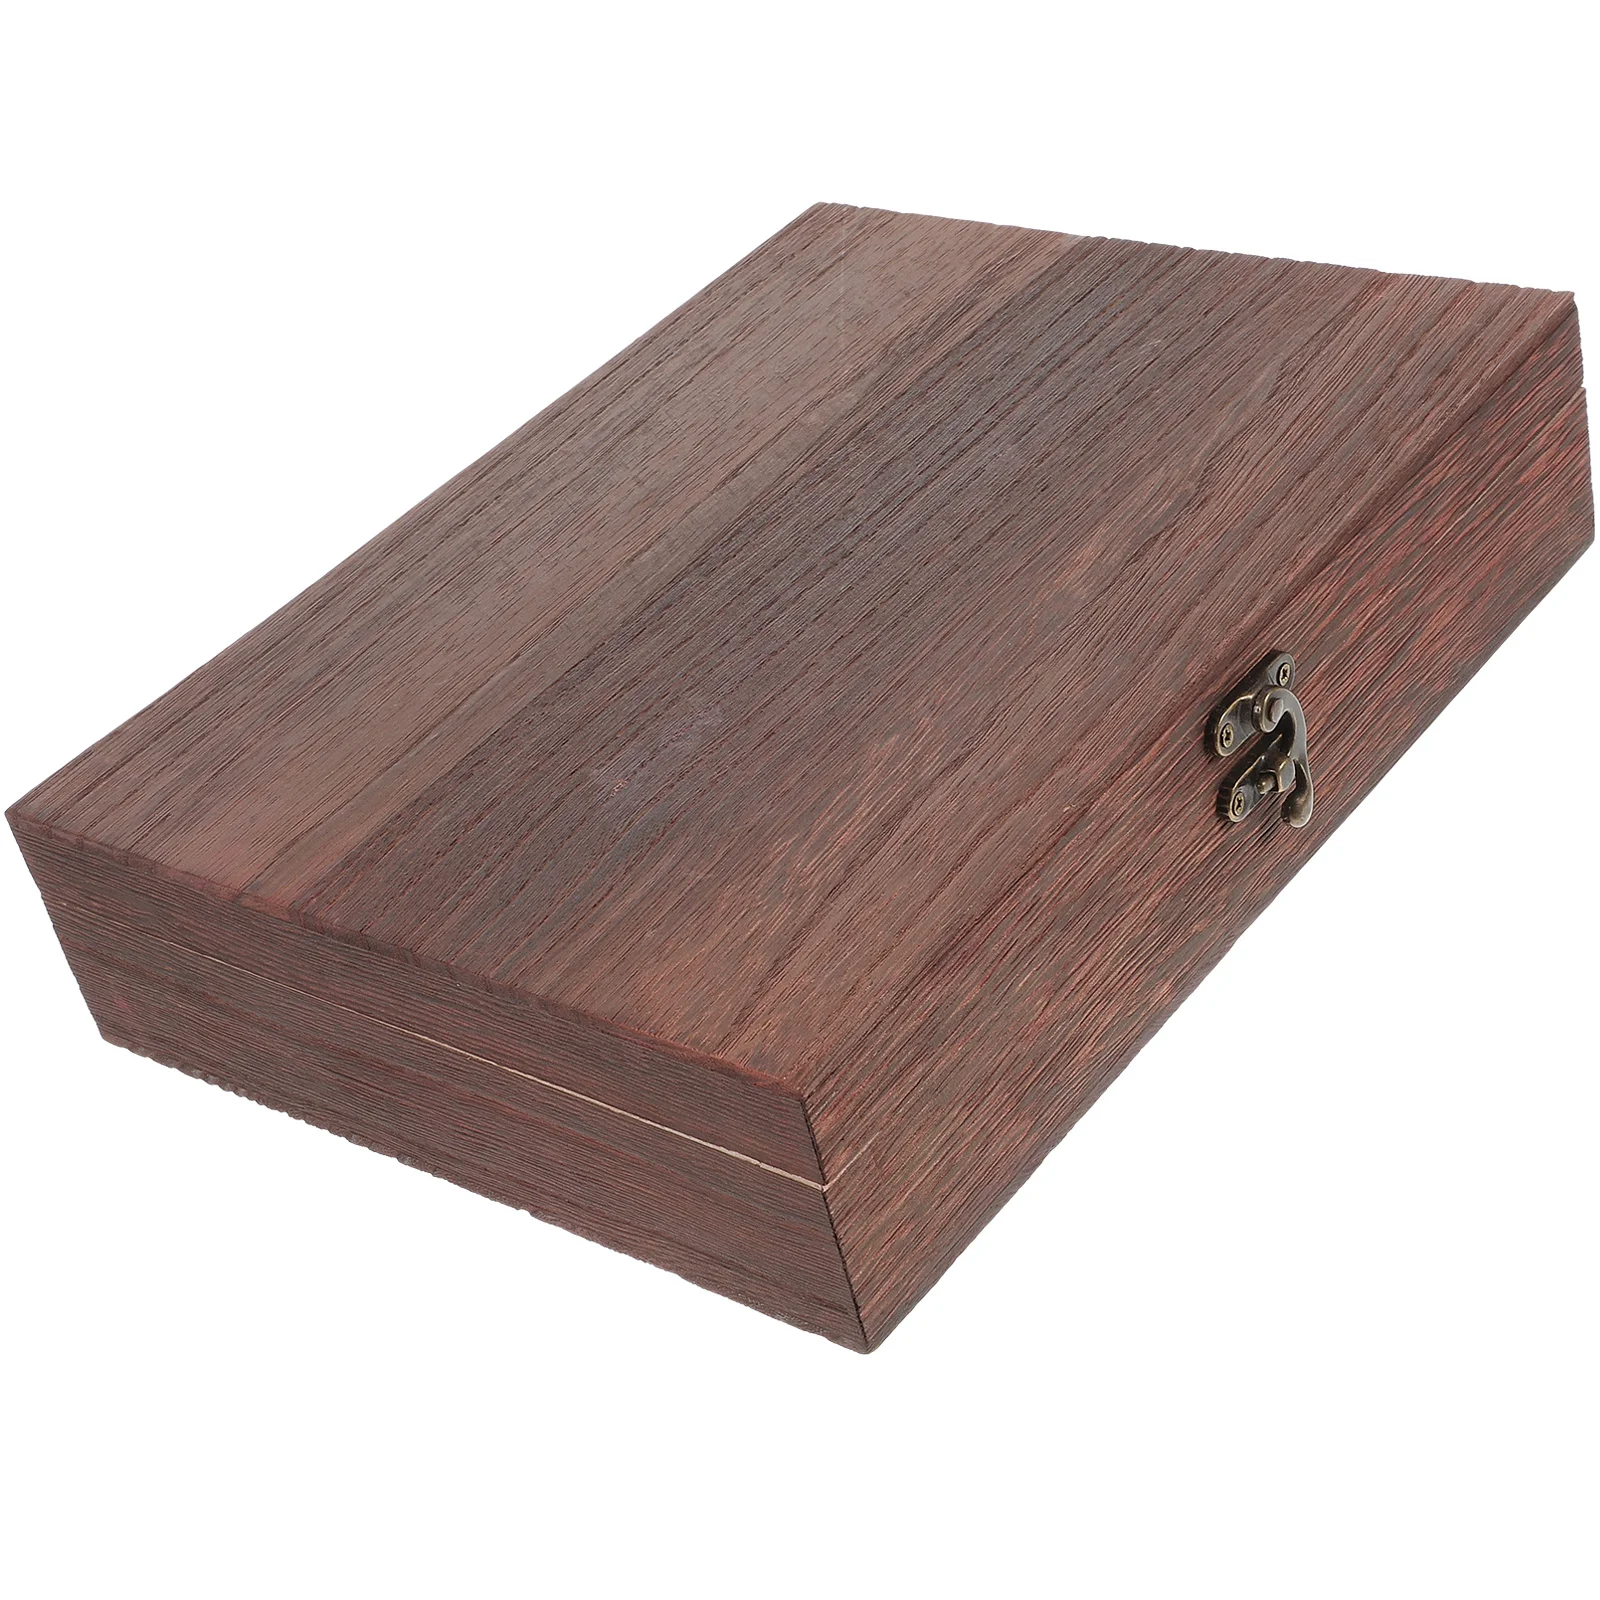 

Wooden Storage Box Rustic Jewelry Case Lockable Dust-proof Delicate Treasure Charming